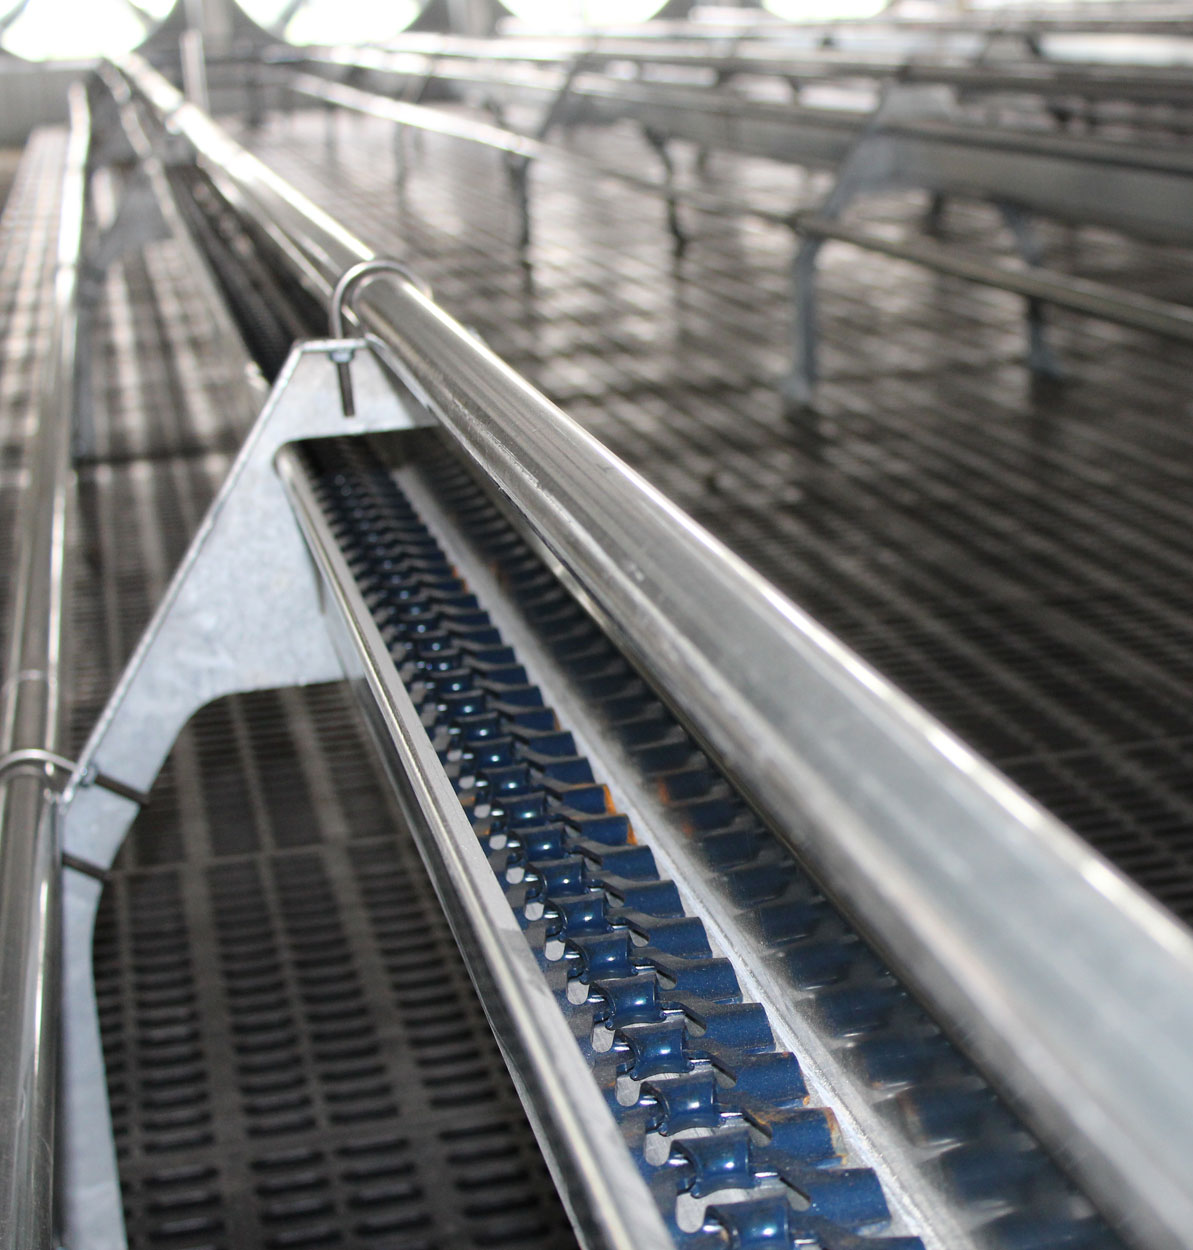 GrowerSELECT® chain feed system trough and chain installed in a newly constructed pullet barn.